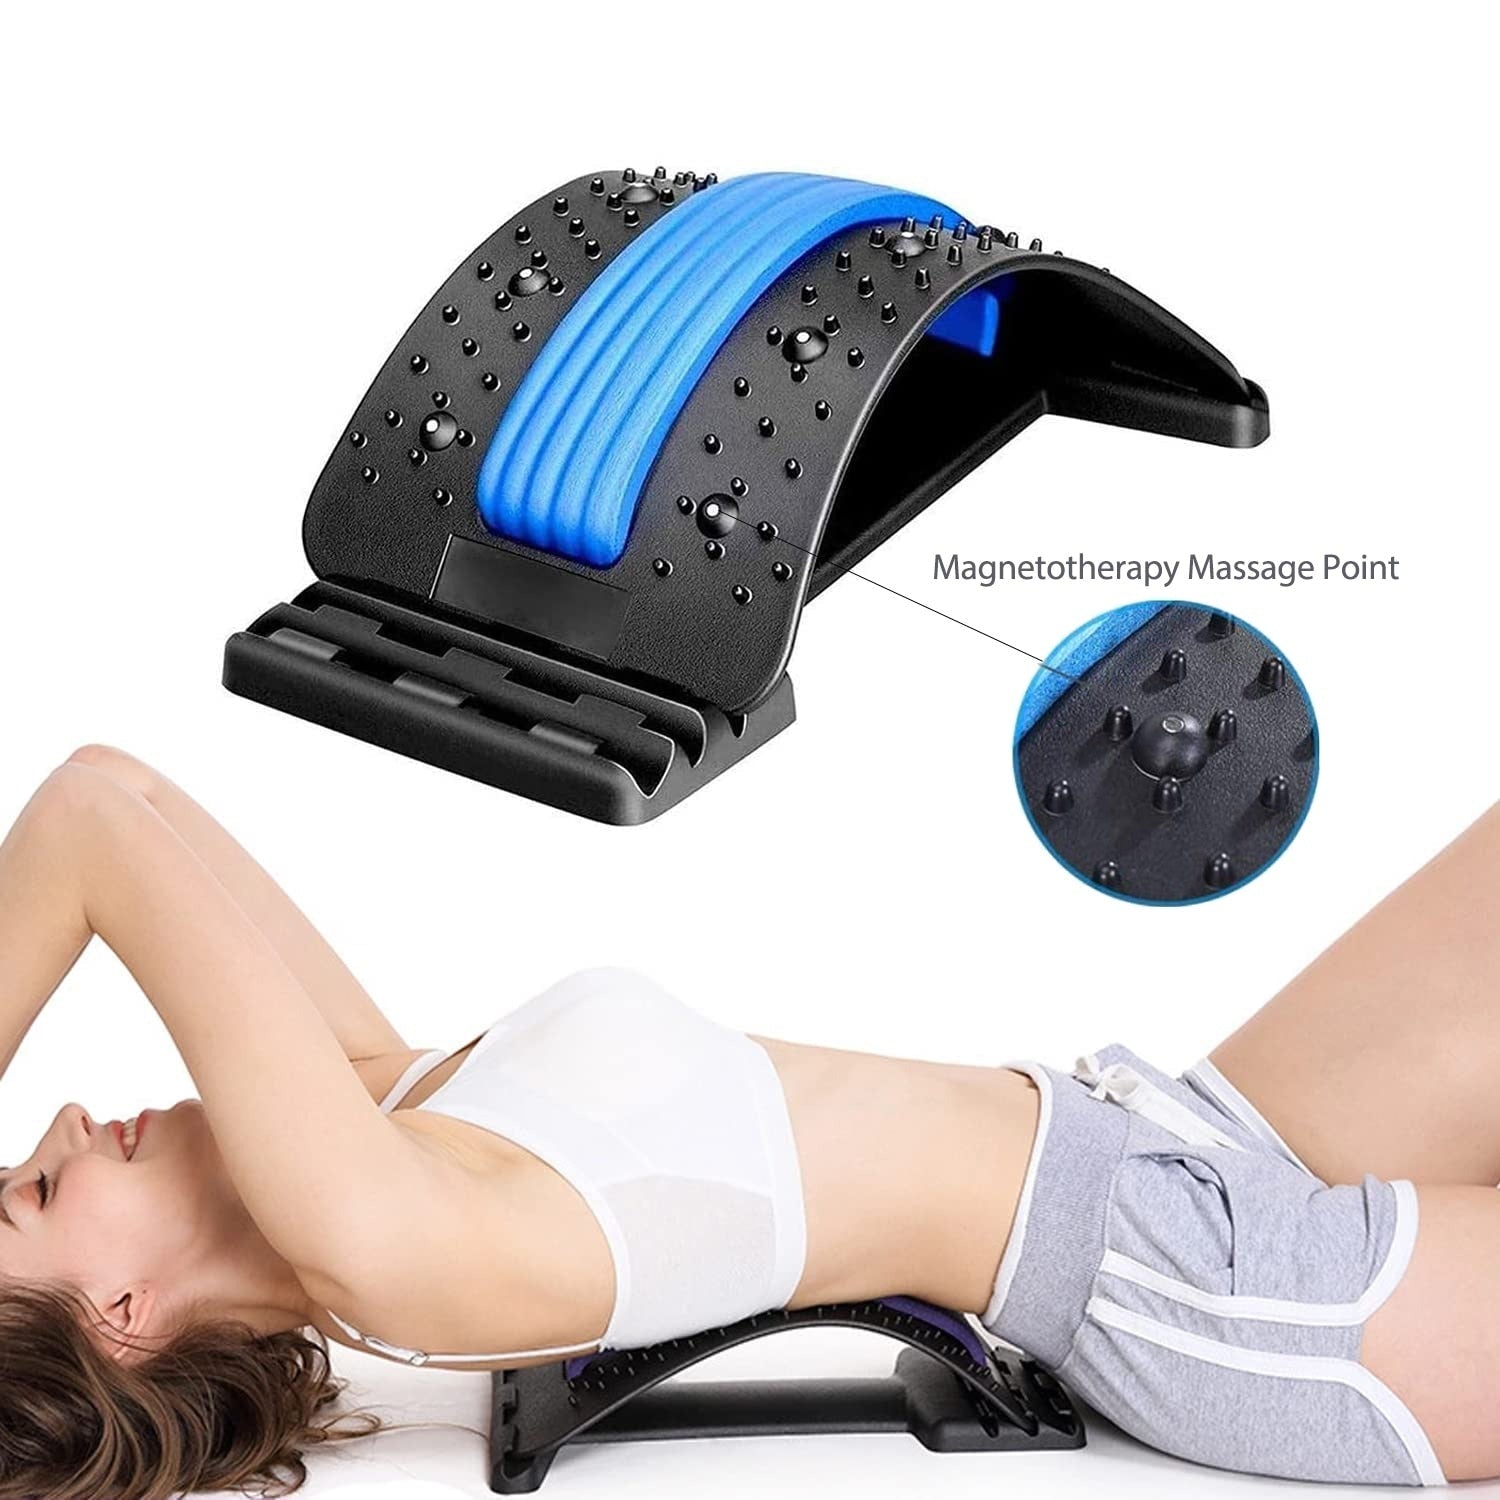 Lumbar Back Stretcher, Multi-Level Orthopedic Back Massager for herniated  disc, Scoliosis, Sciatica Pain Relief and Decompression - Black&Blue 